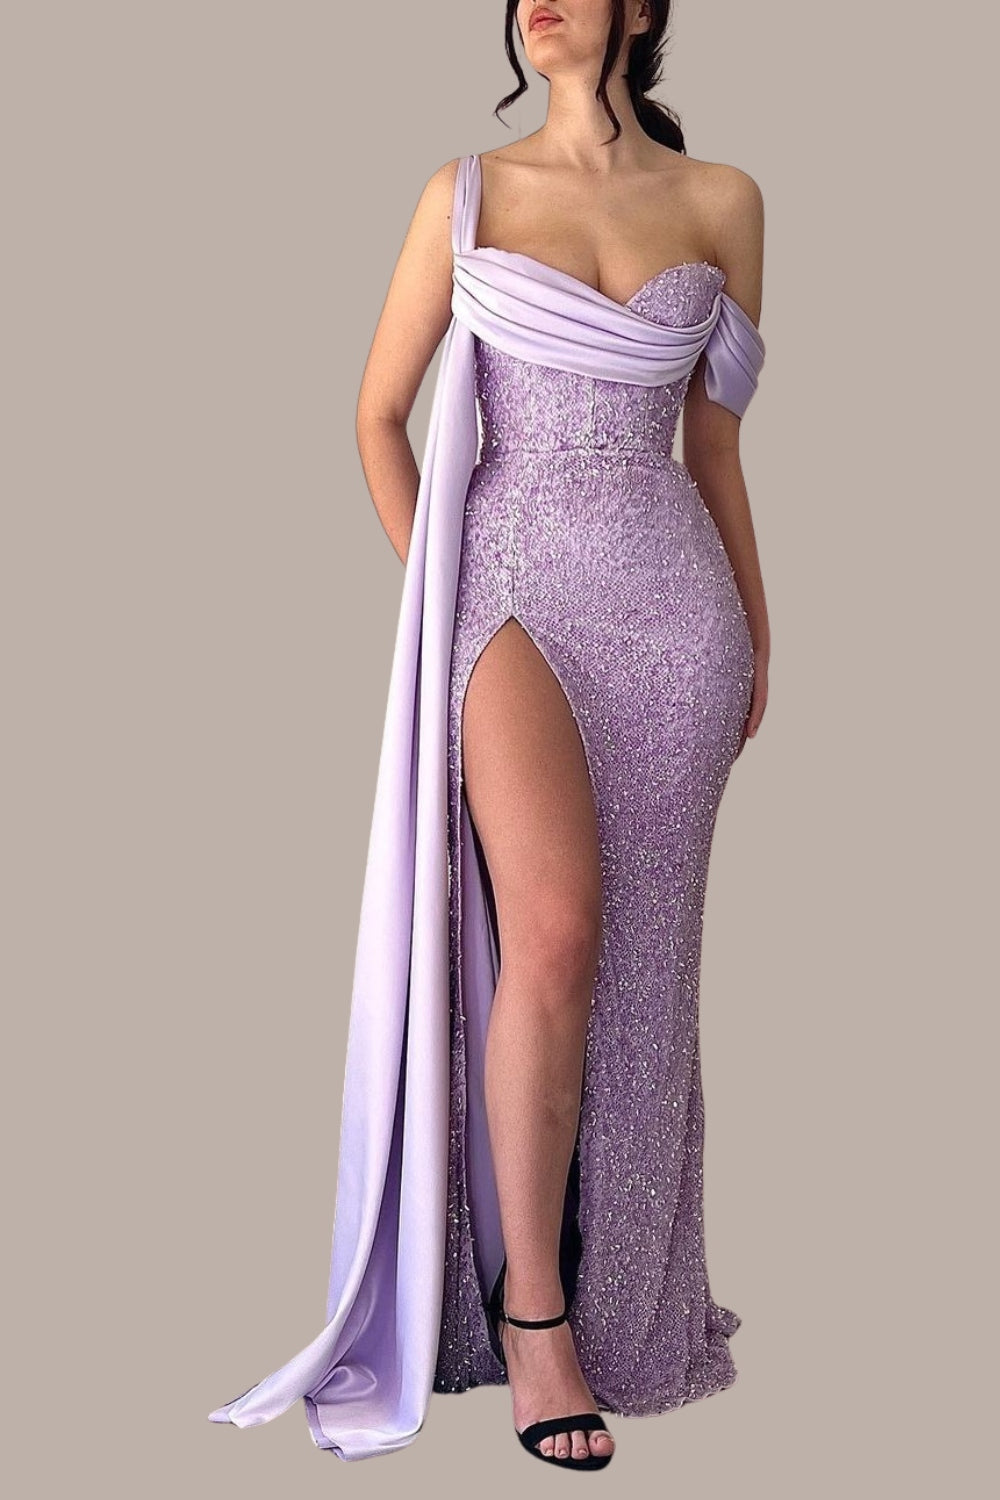 Mermaid Sparkly Purple Long Prom Dress with Slit